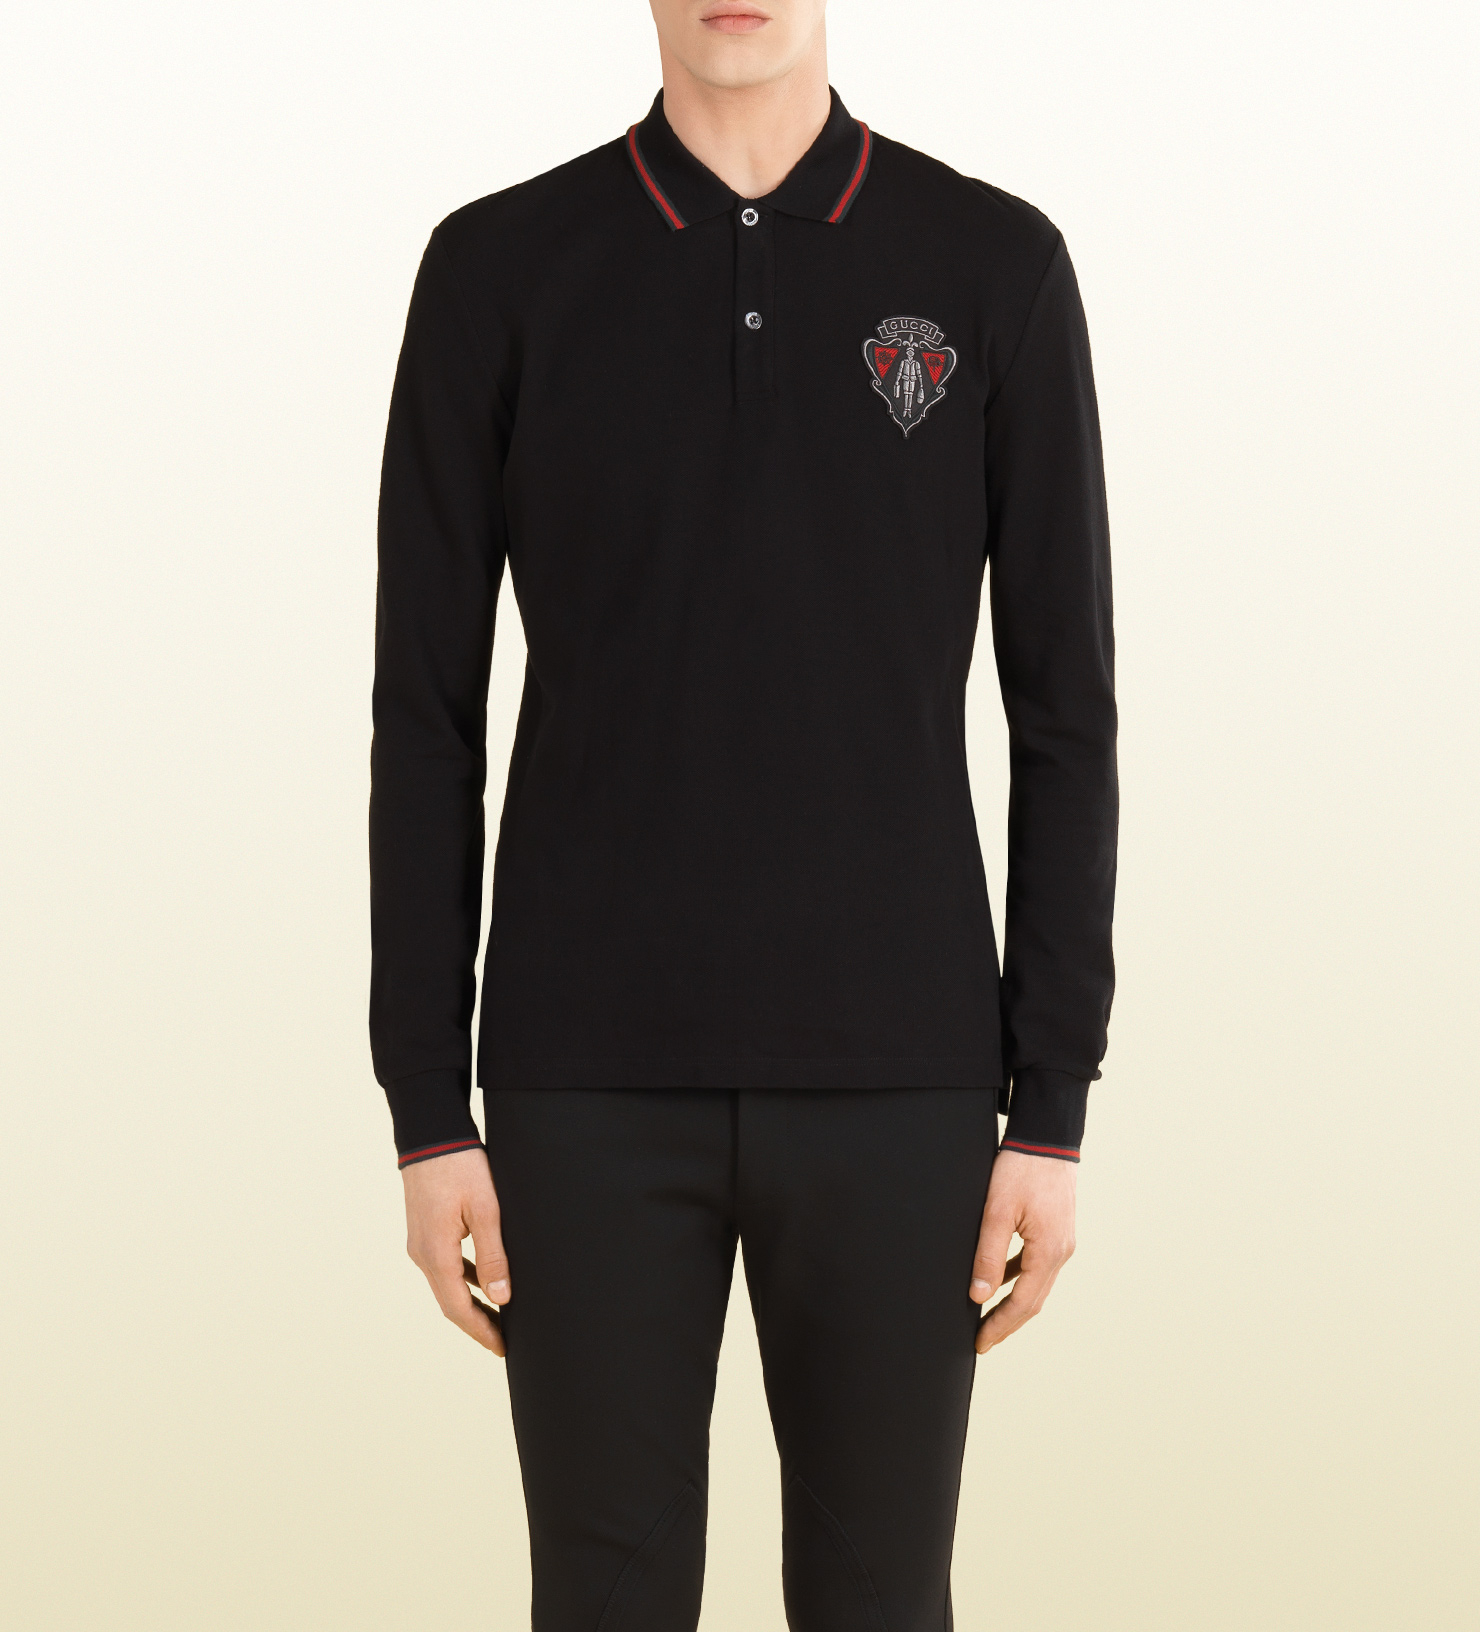 Lyst - Gucci Long Sleeve Polo Shirt in Black for Men